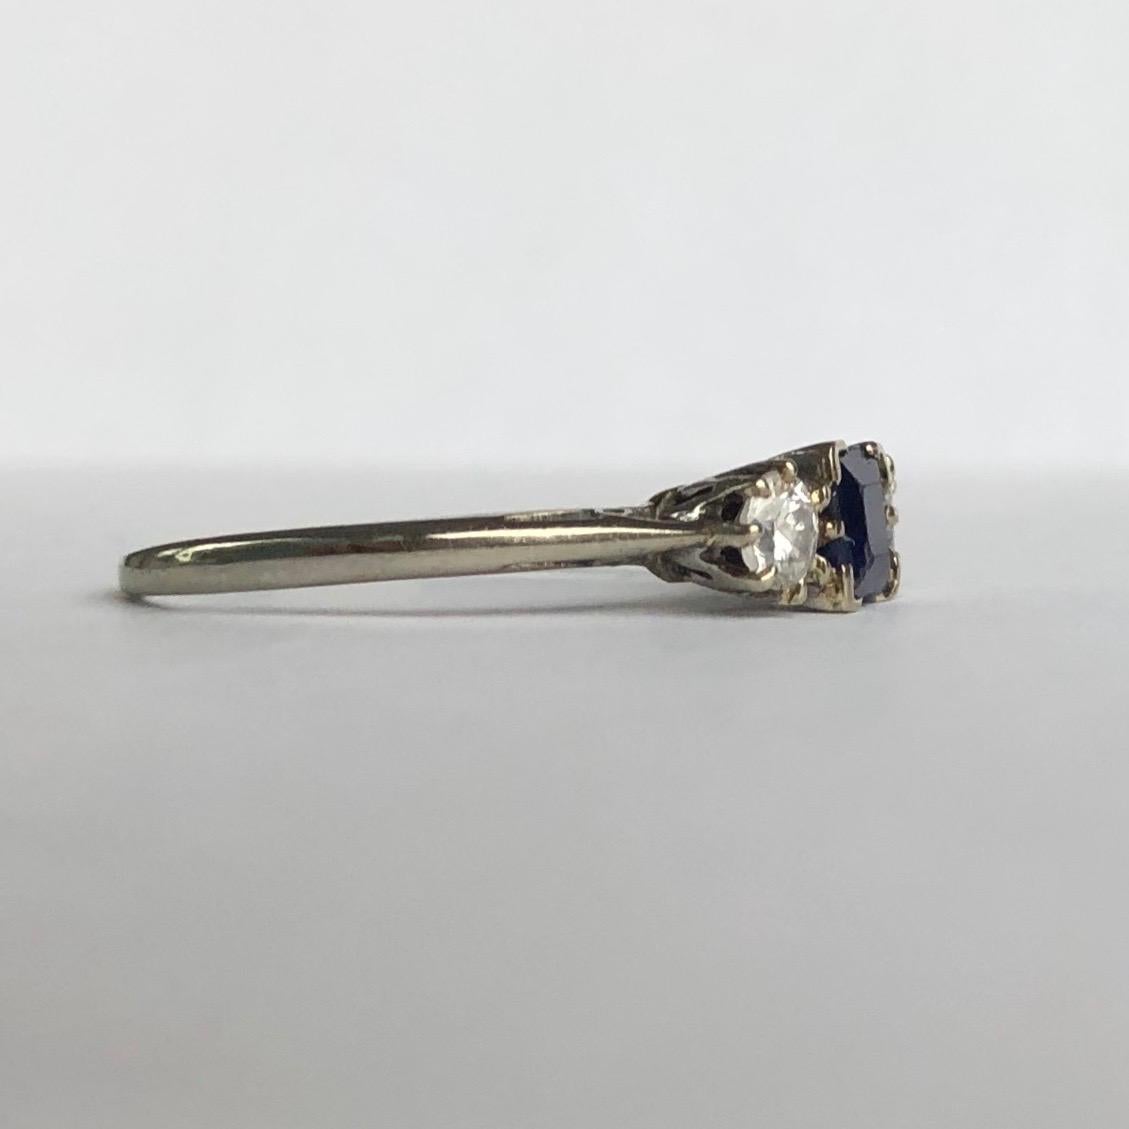 At centre of this three stone ring there is a gorgeous deep blue sapphire and sat either side is a bright sparkling diamond. The square cut sapphire measures 40pts and the old European cut diamonds measure 20pts each and are set in platinum.

Ring